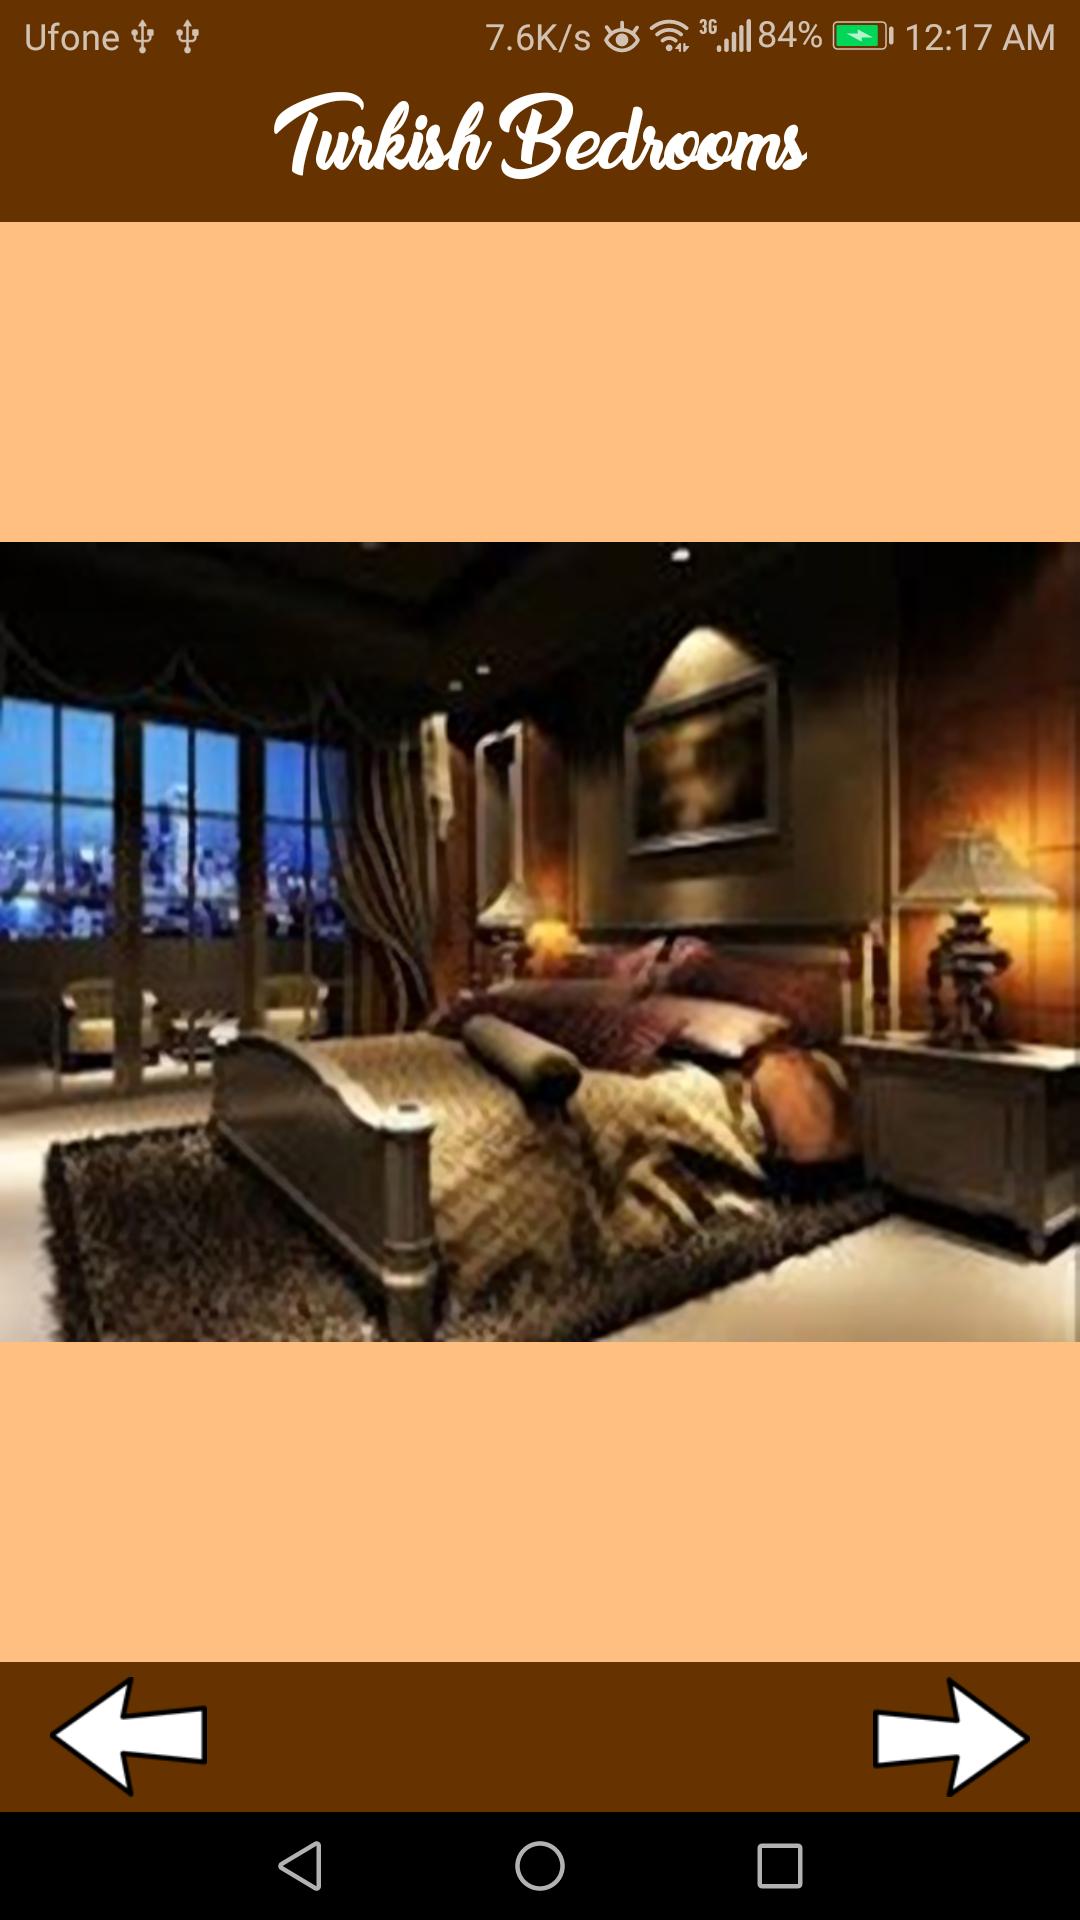 Turkish Bedroom Interior Designs For Android Apk Download